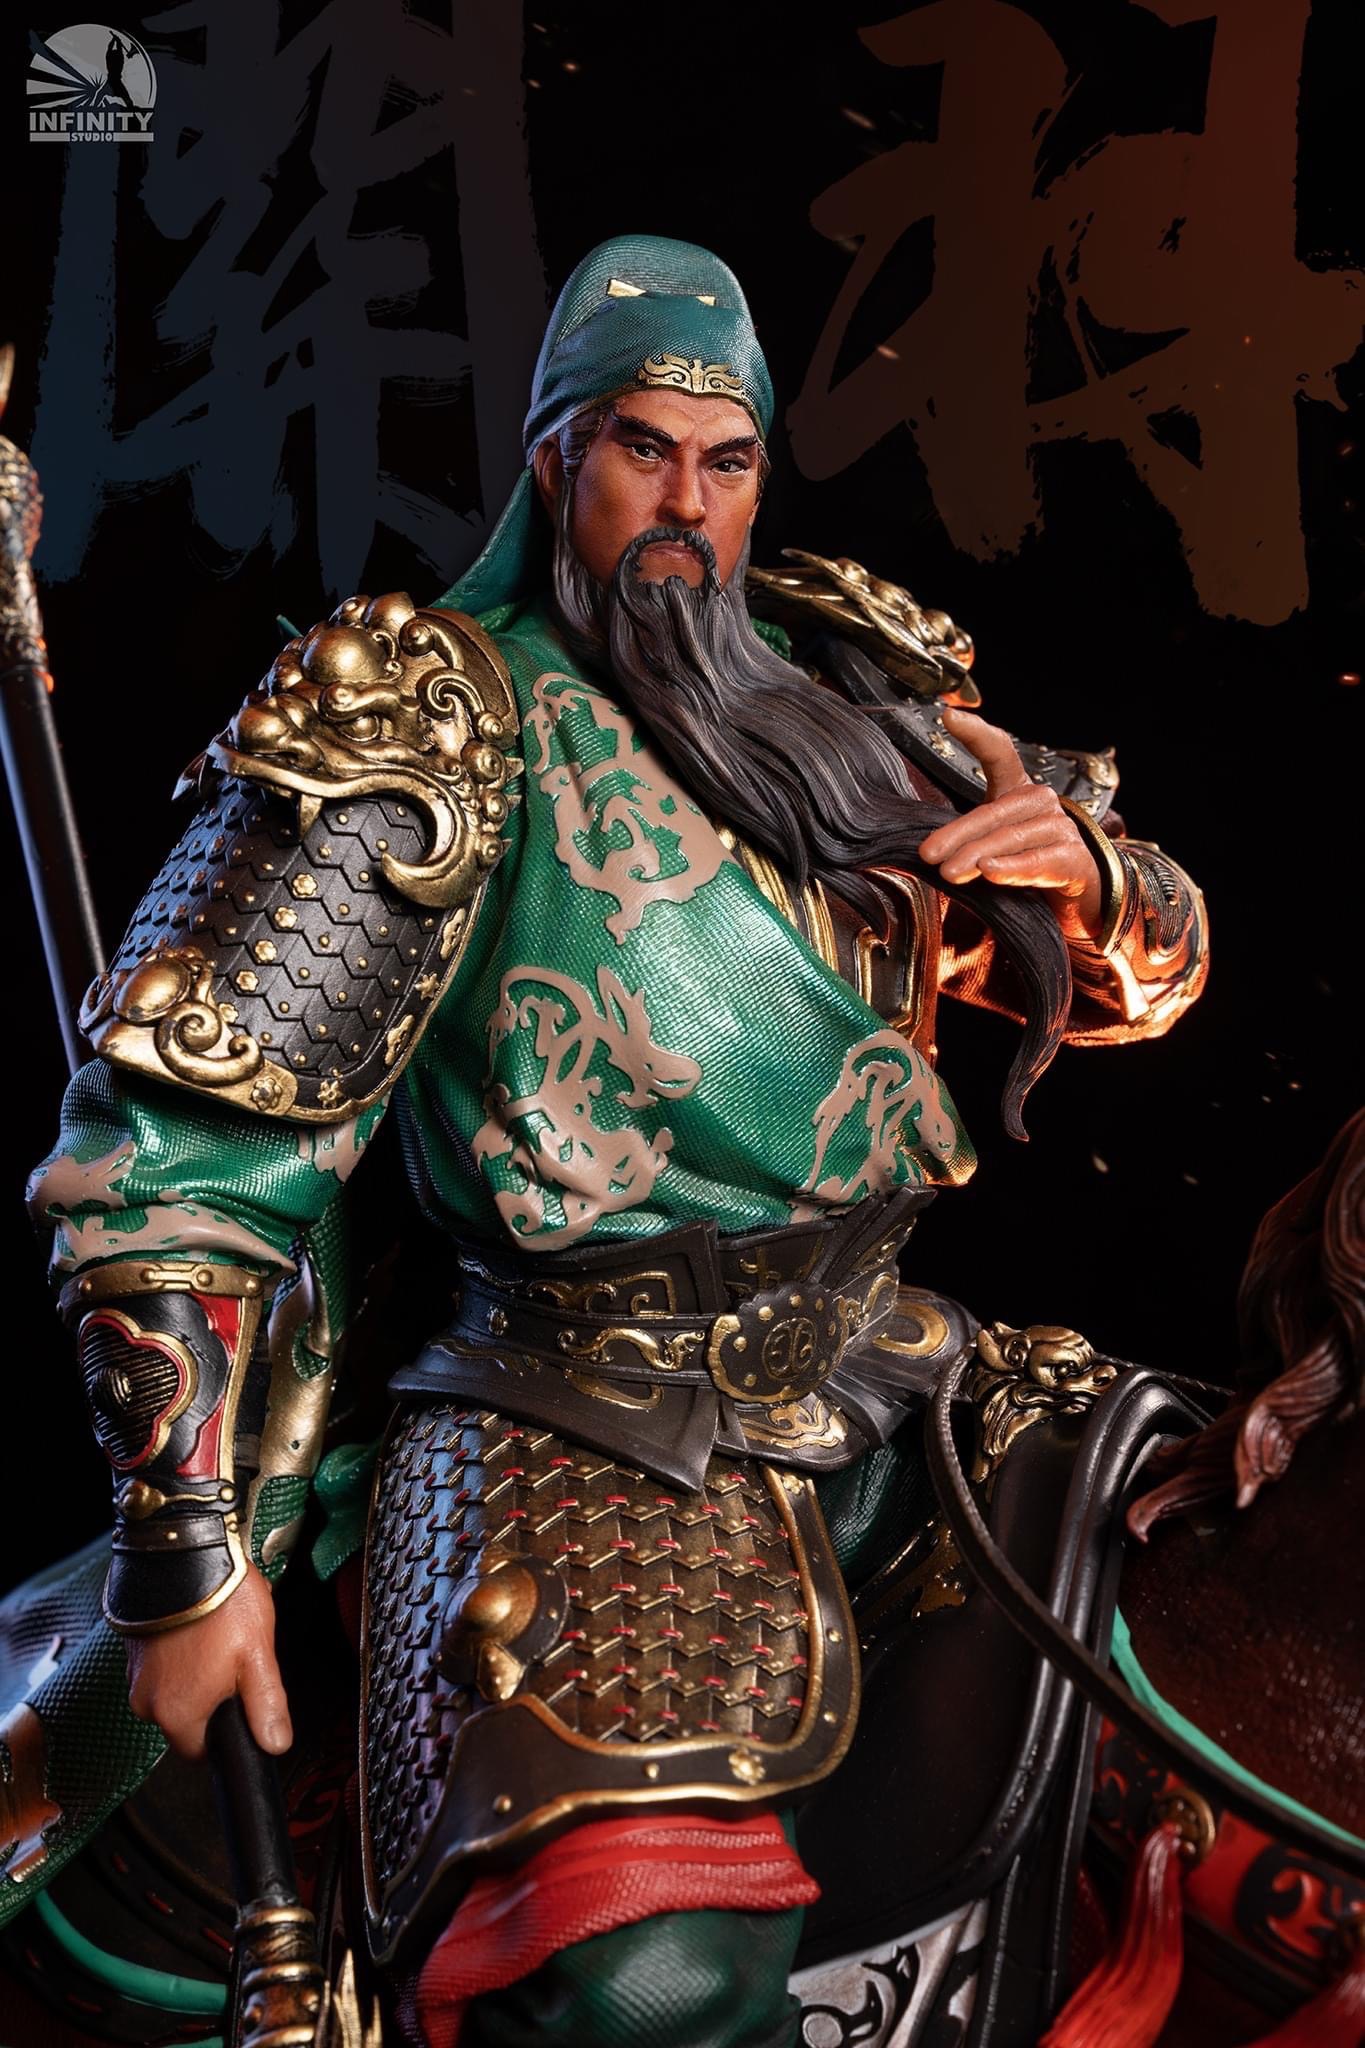 Deluxe Guan Yu กวนอู by Infinity Studio (มัดจำ) [[SOLD OUT]]